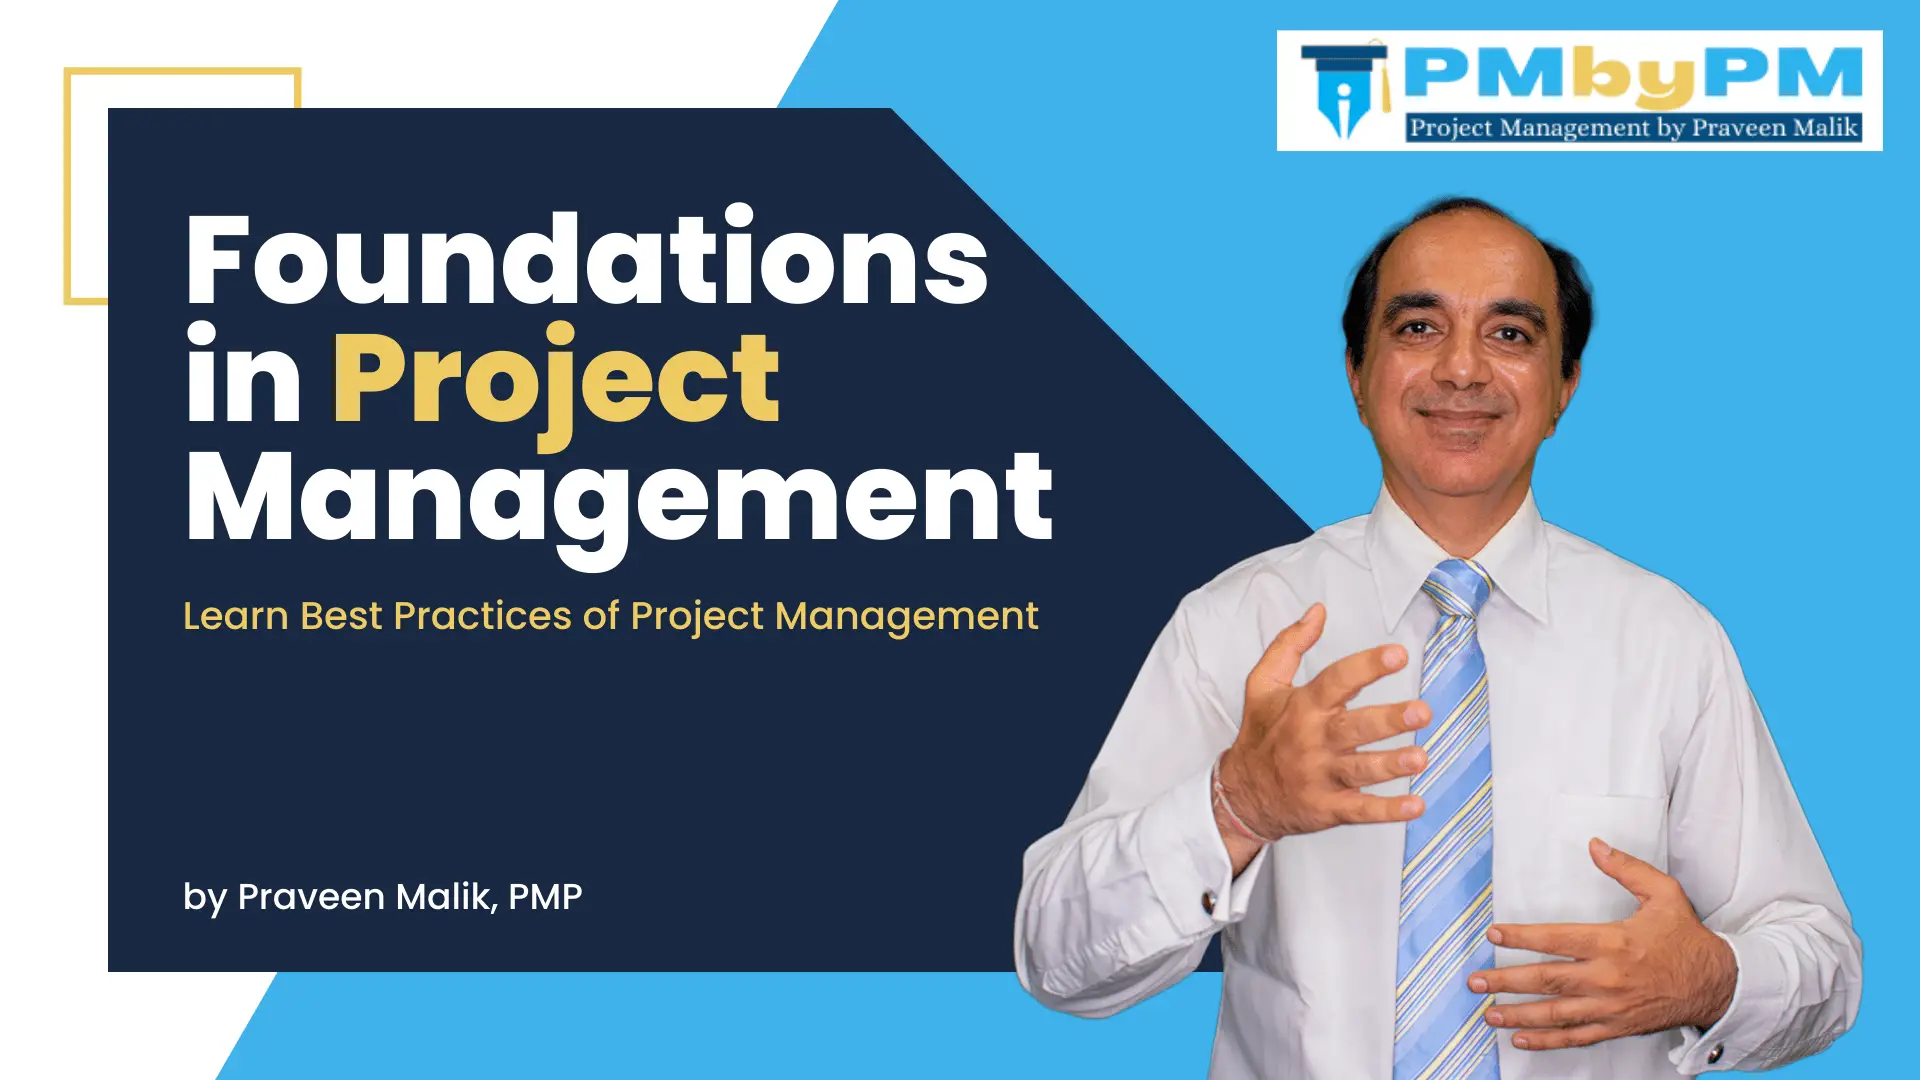 Foundations in Project Management pmbypm